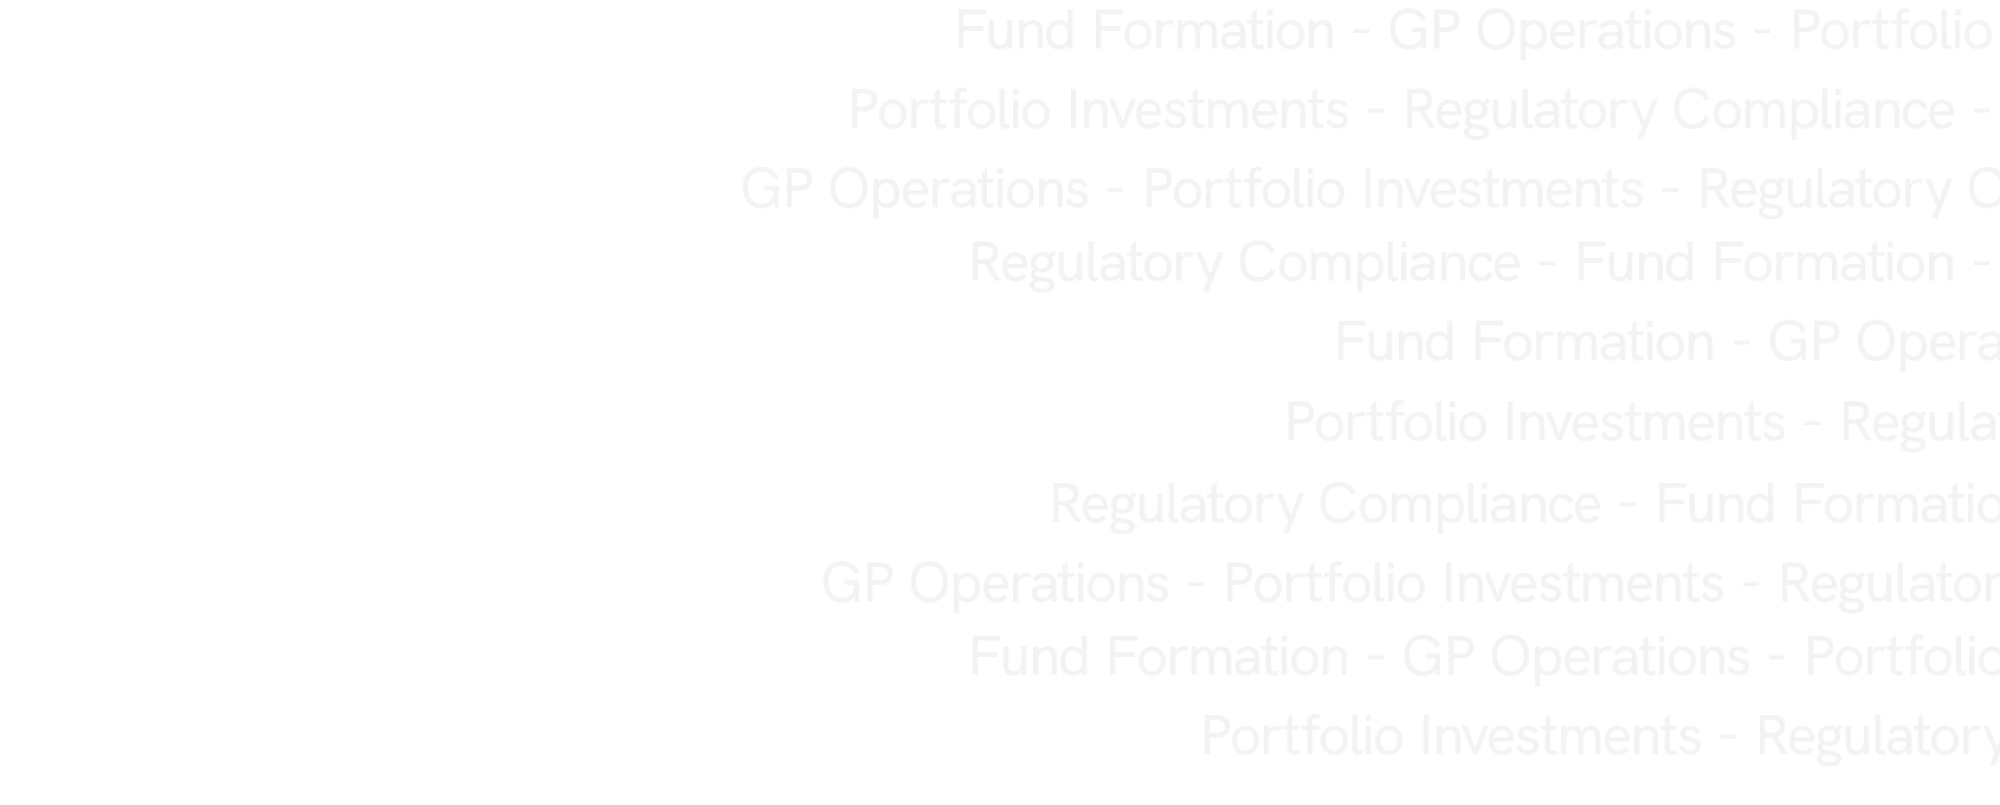 services-investment-funds-word-collage